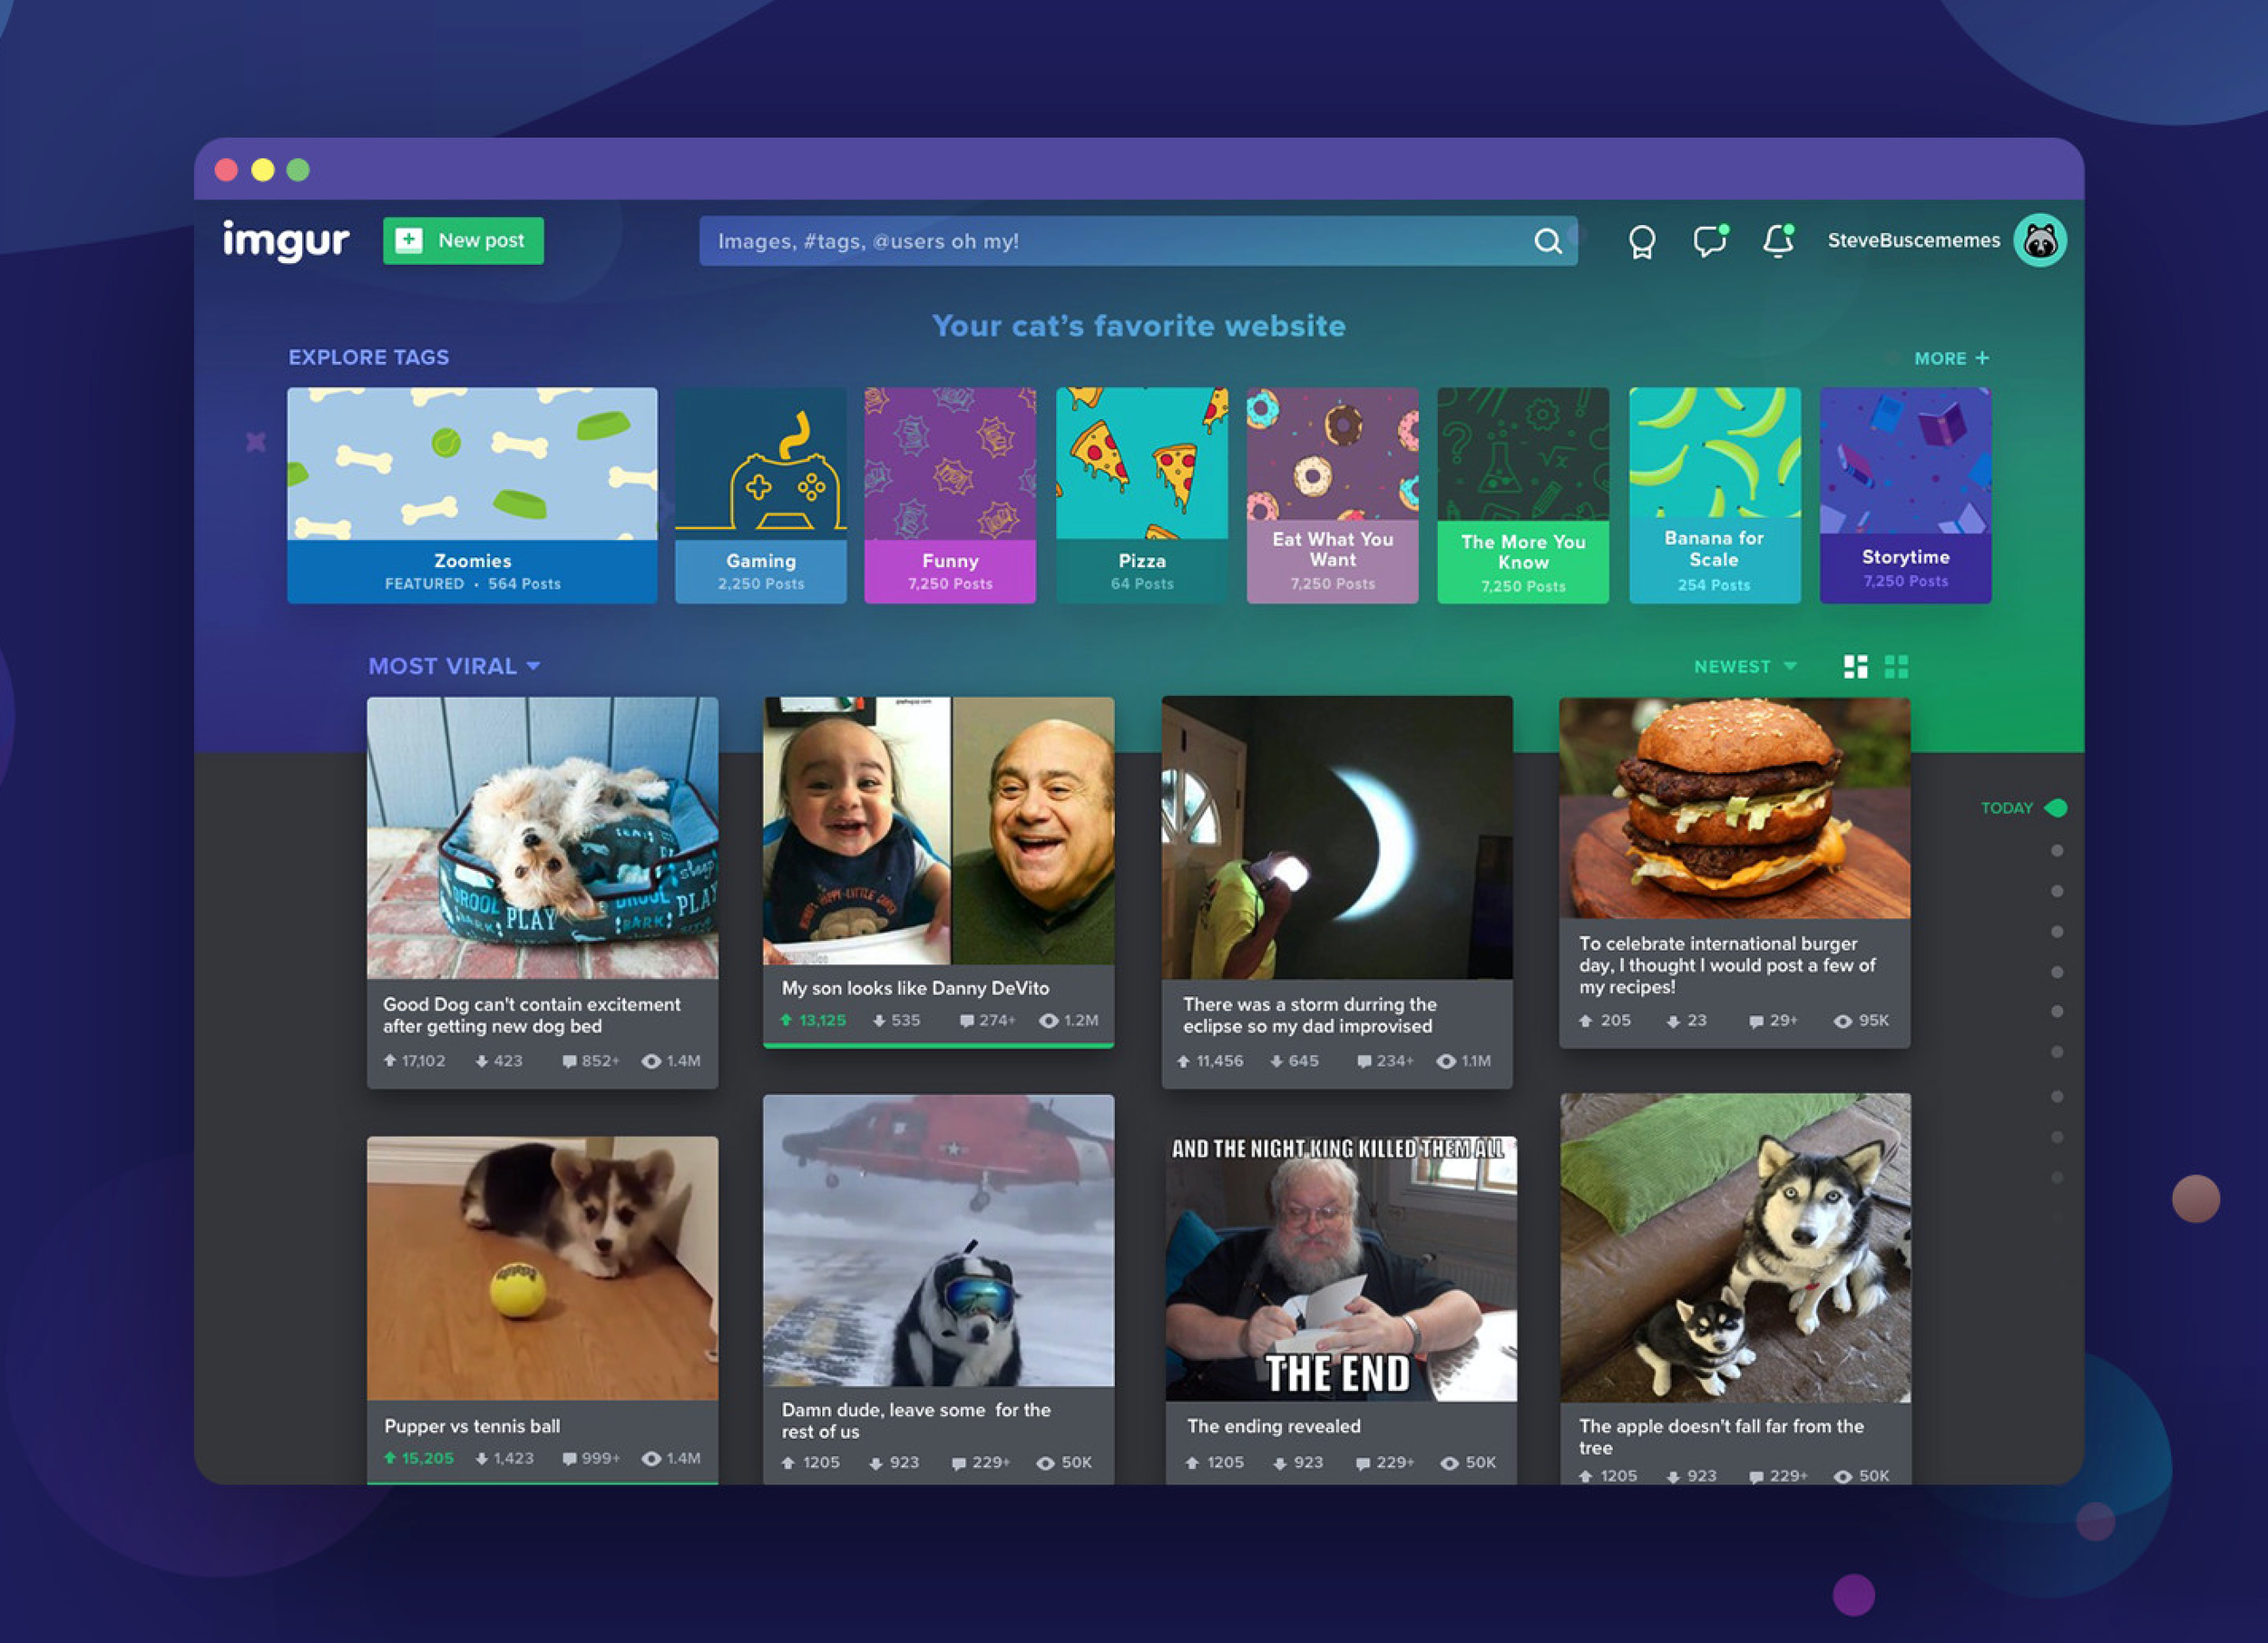 The last update to Imgur’s homepage came in 2014, and since then, a lot has...